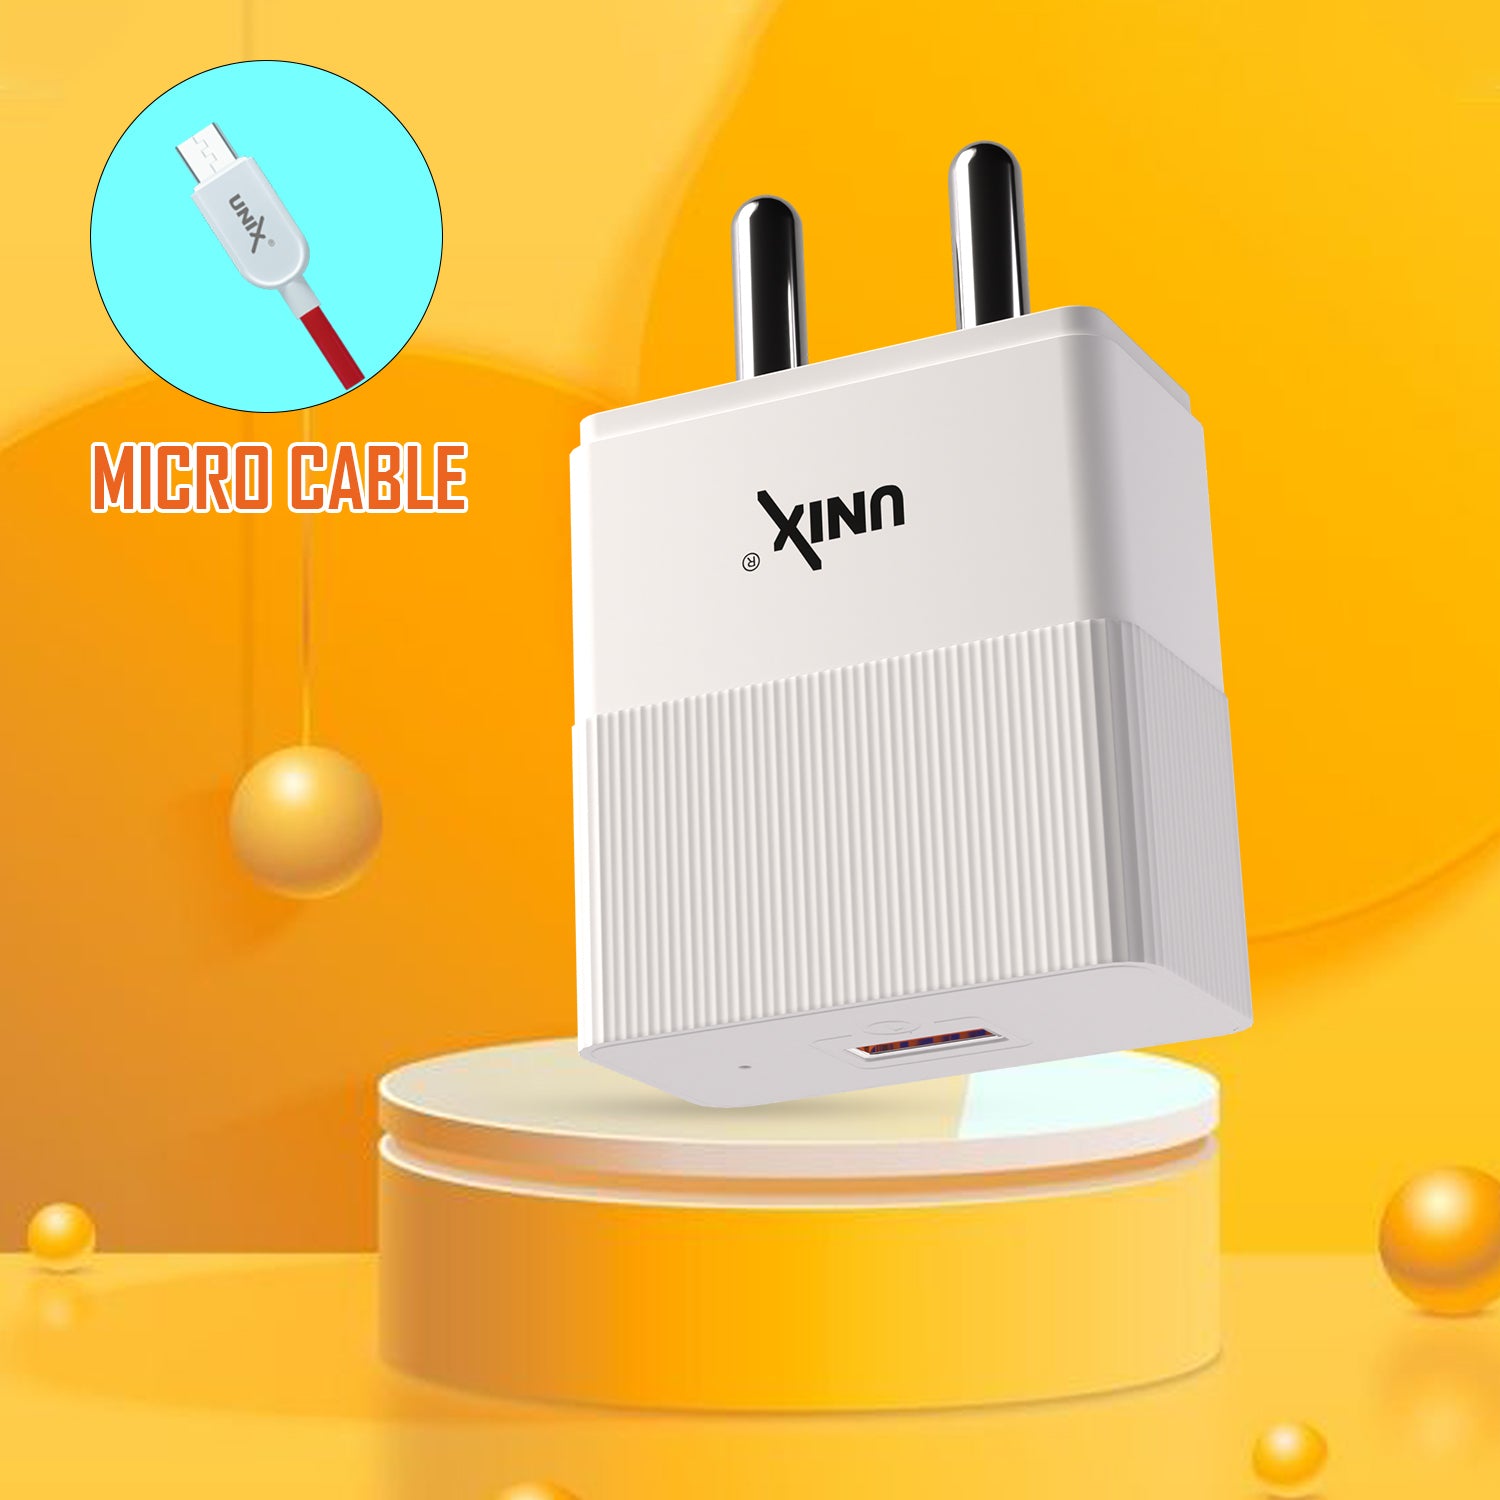 Unix UX-111 - Best Fast Charger for Android Micro USB Cable